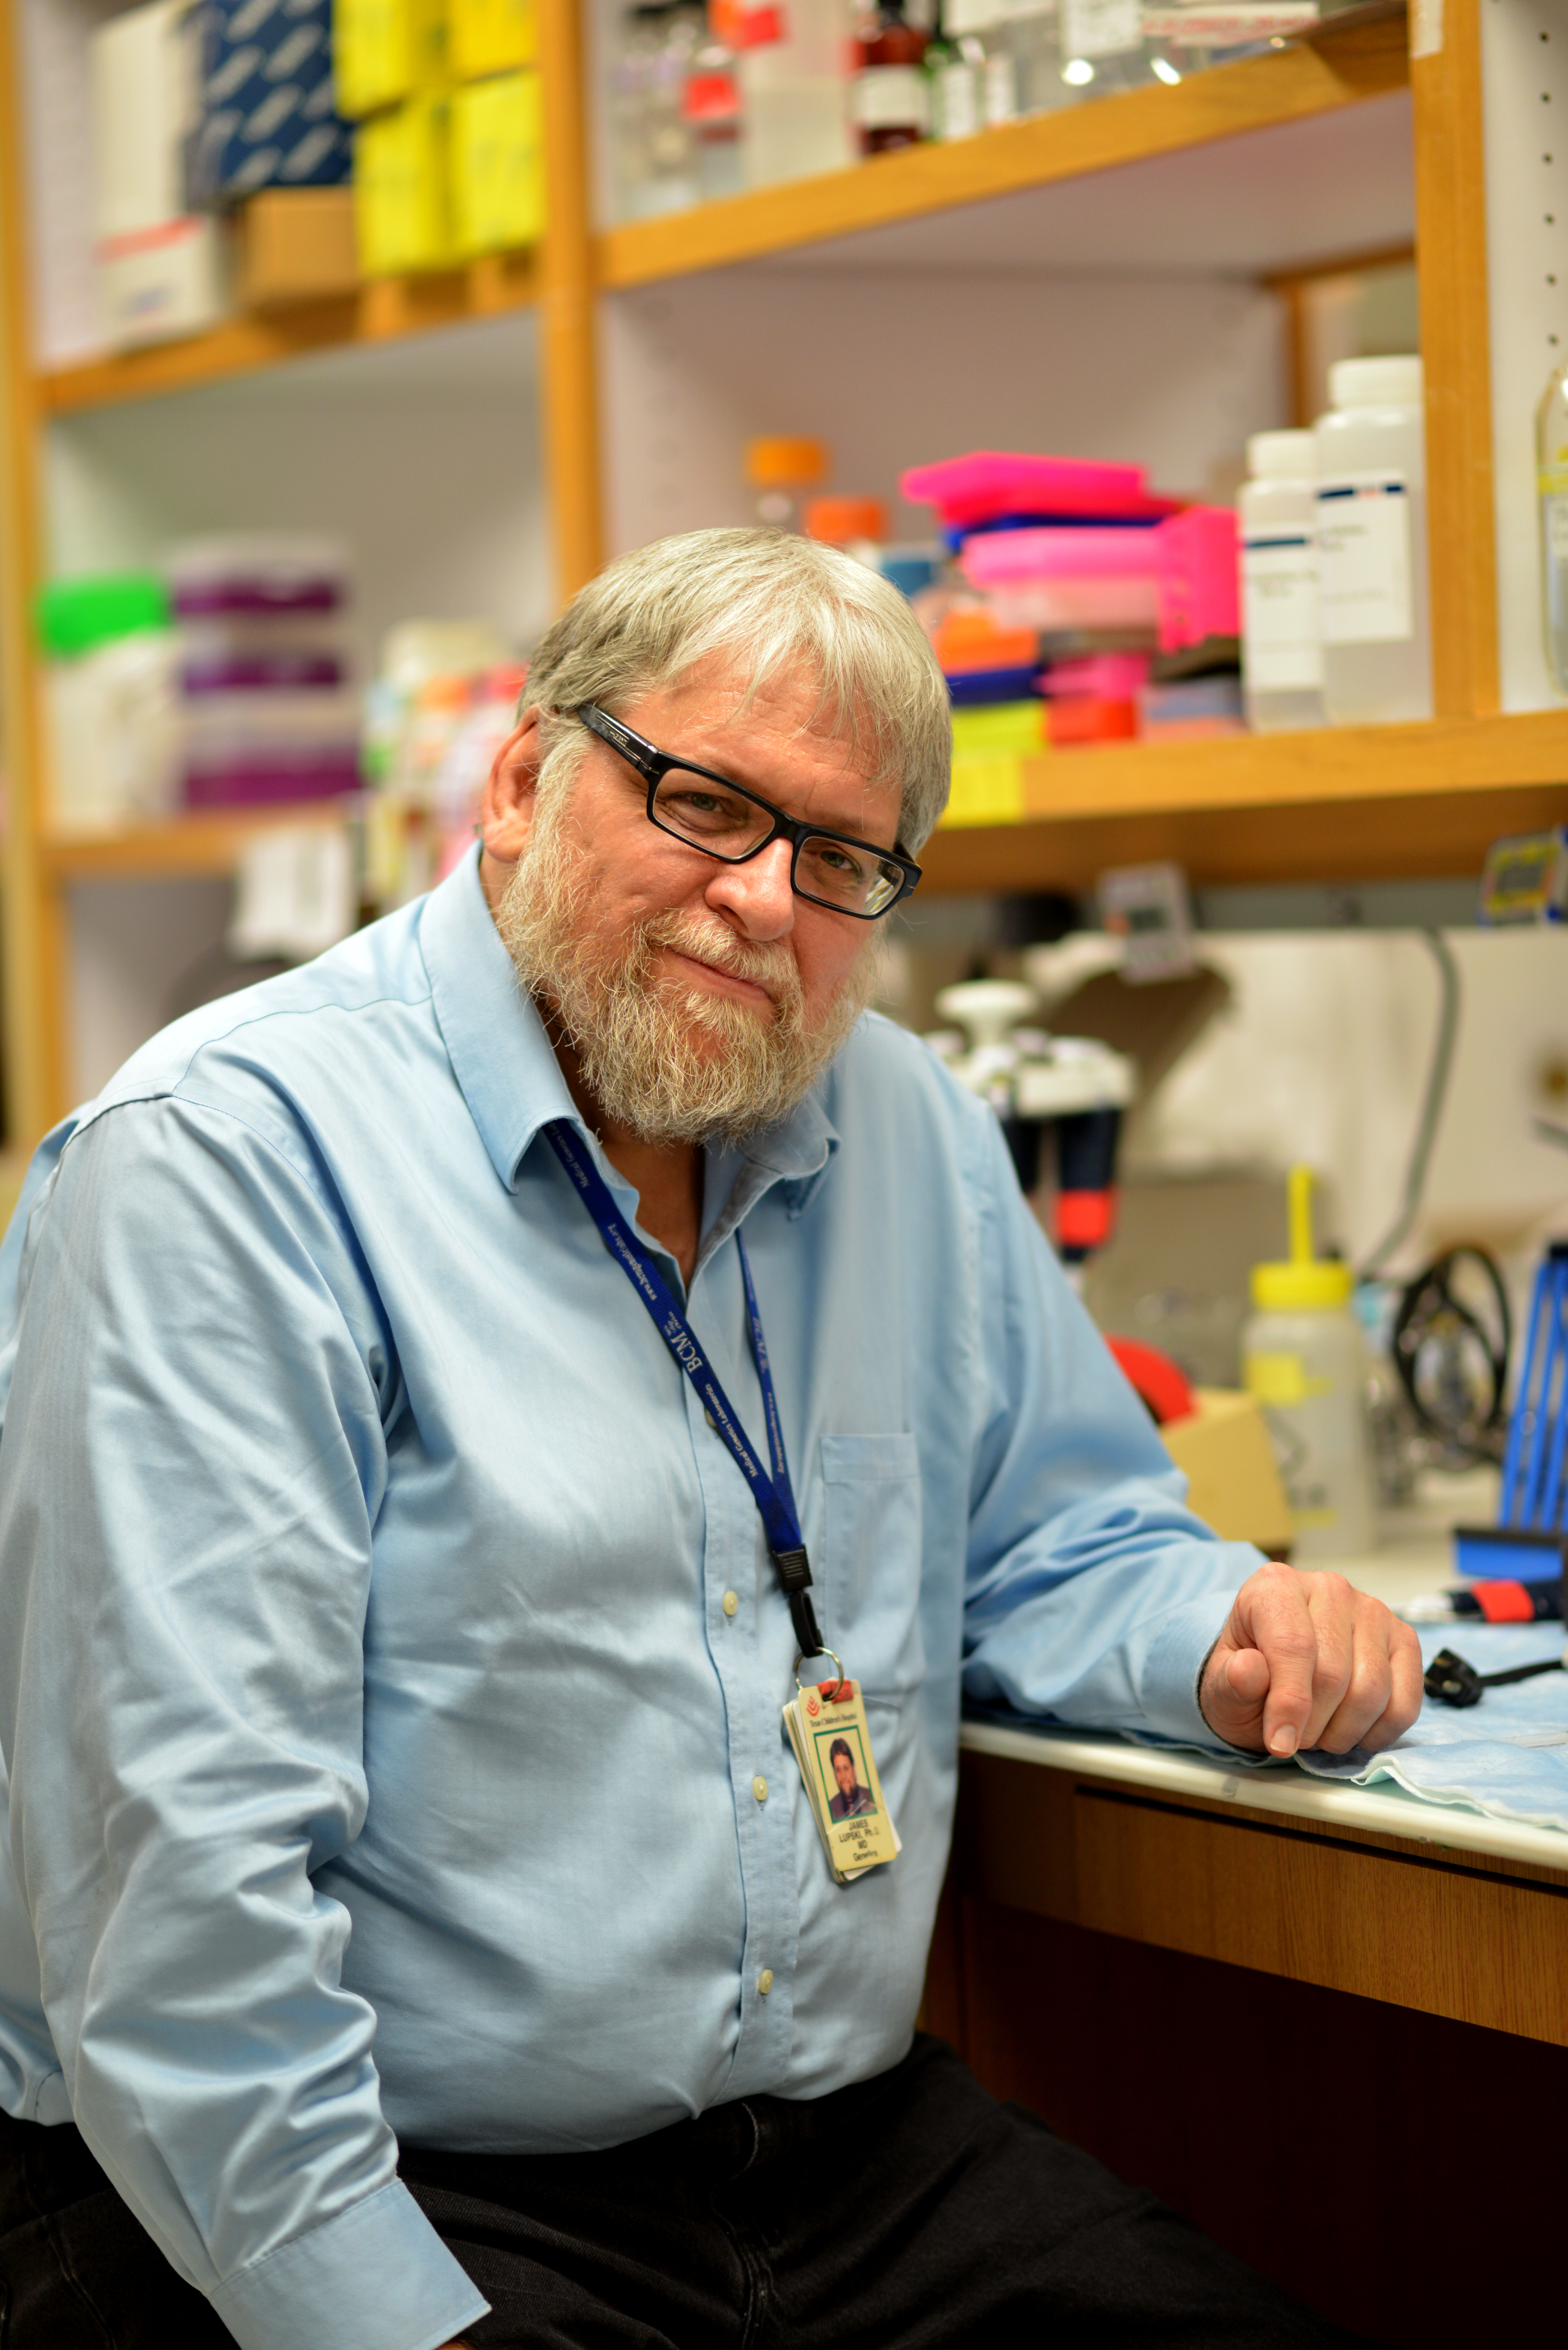 Dr. James Lupski has been named recipient of the 2014 Environmental Mutagenesis and Genomics Society Award